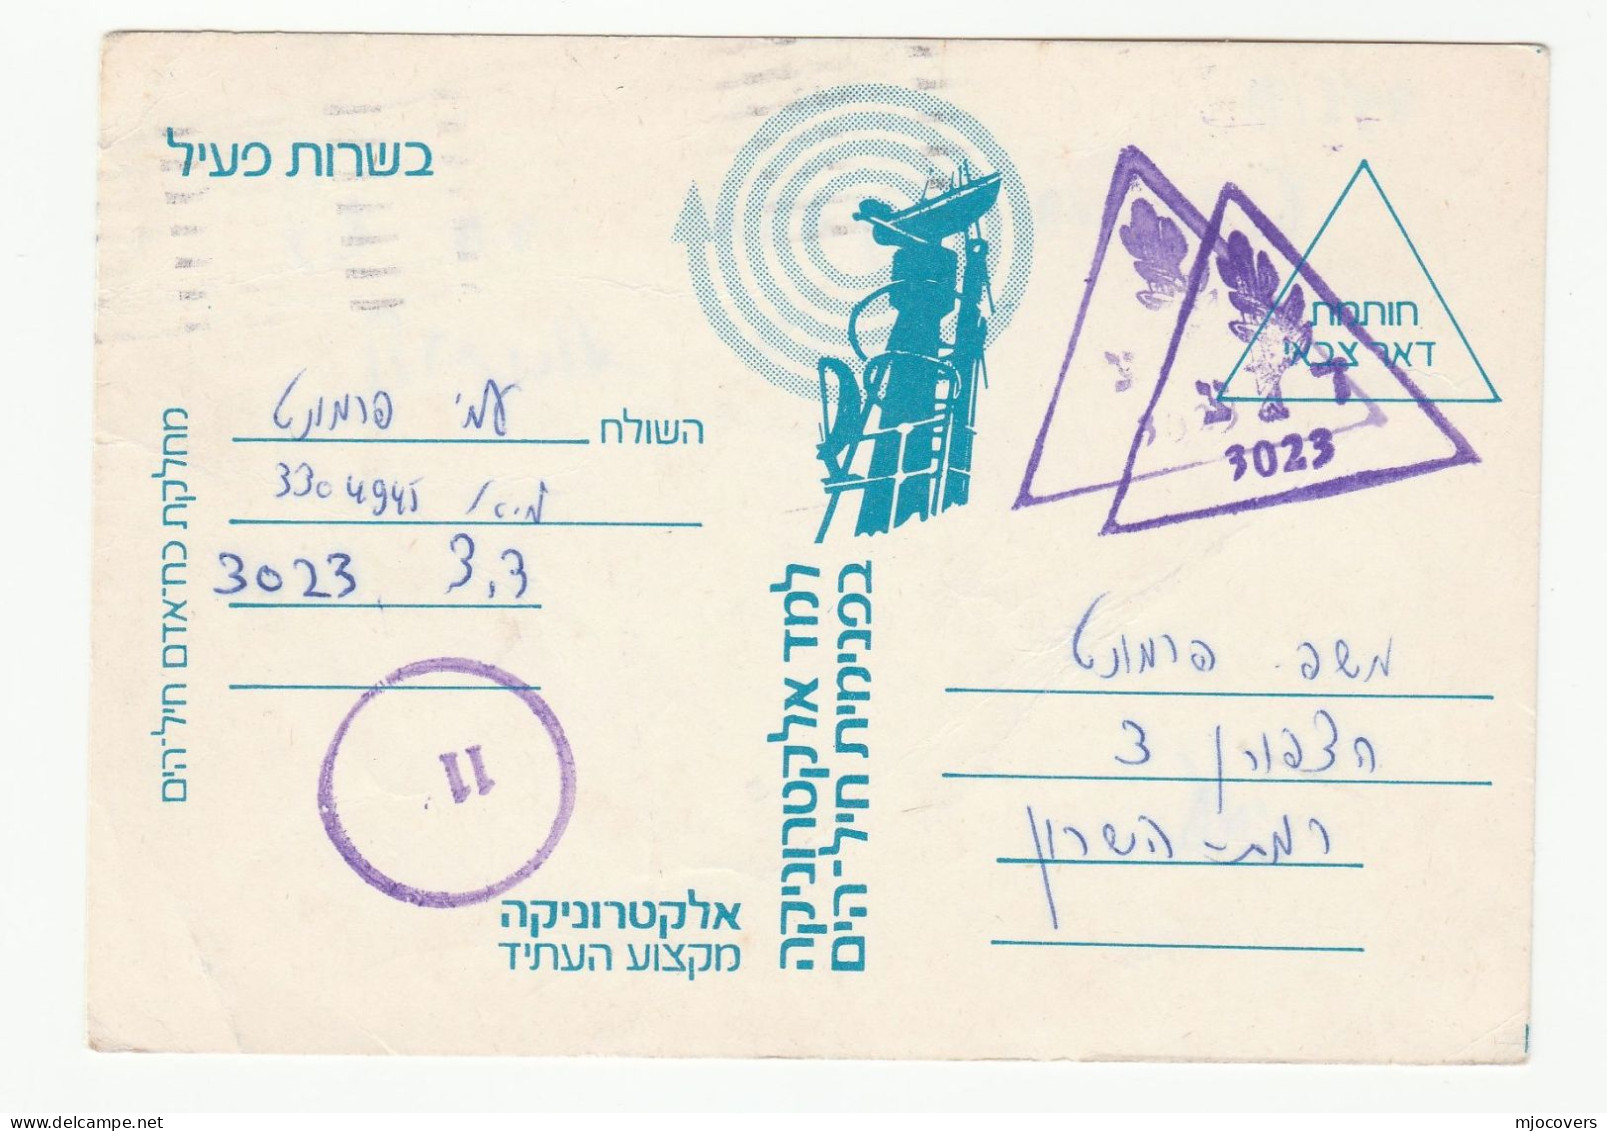 1979 Israel NAVY MILITARY SERVICE CARD  Forces Mail SHIP Cover Zahal Postcard Unit 3023 Naval Electronics School - Covers & Documents